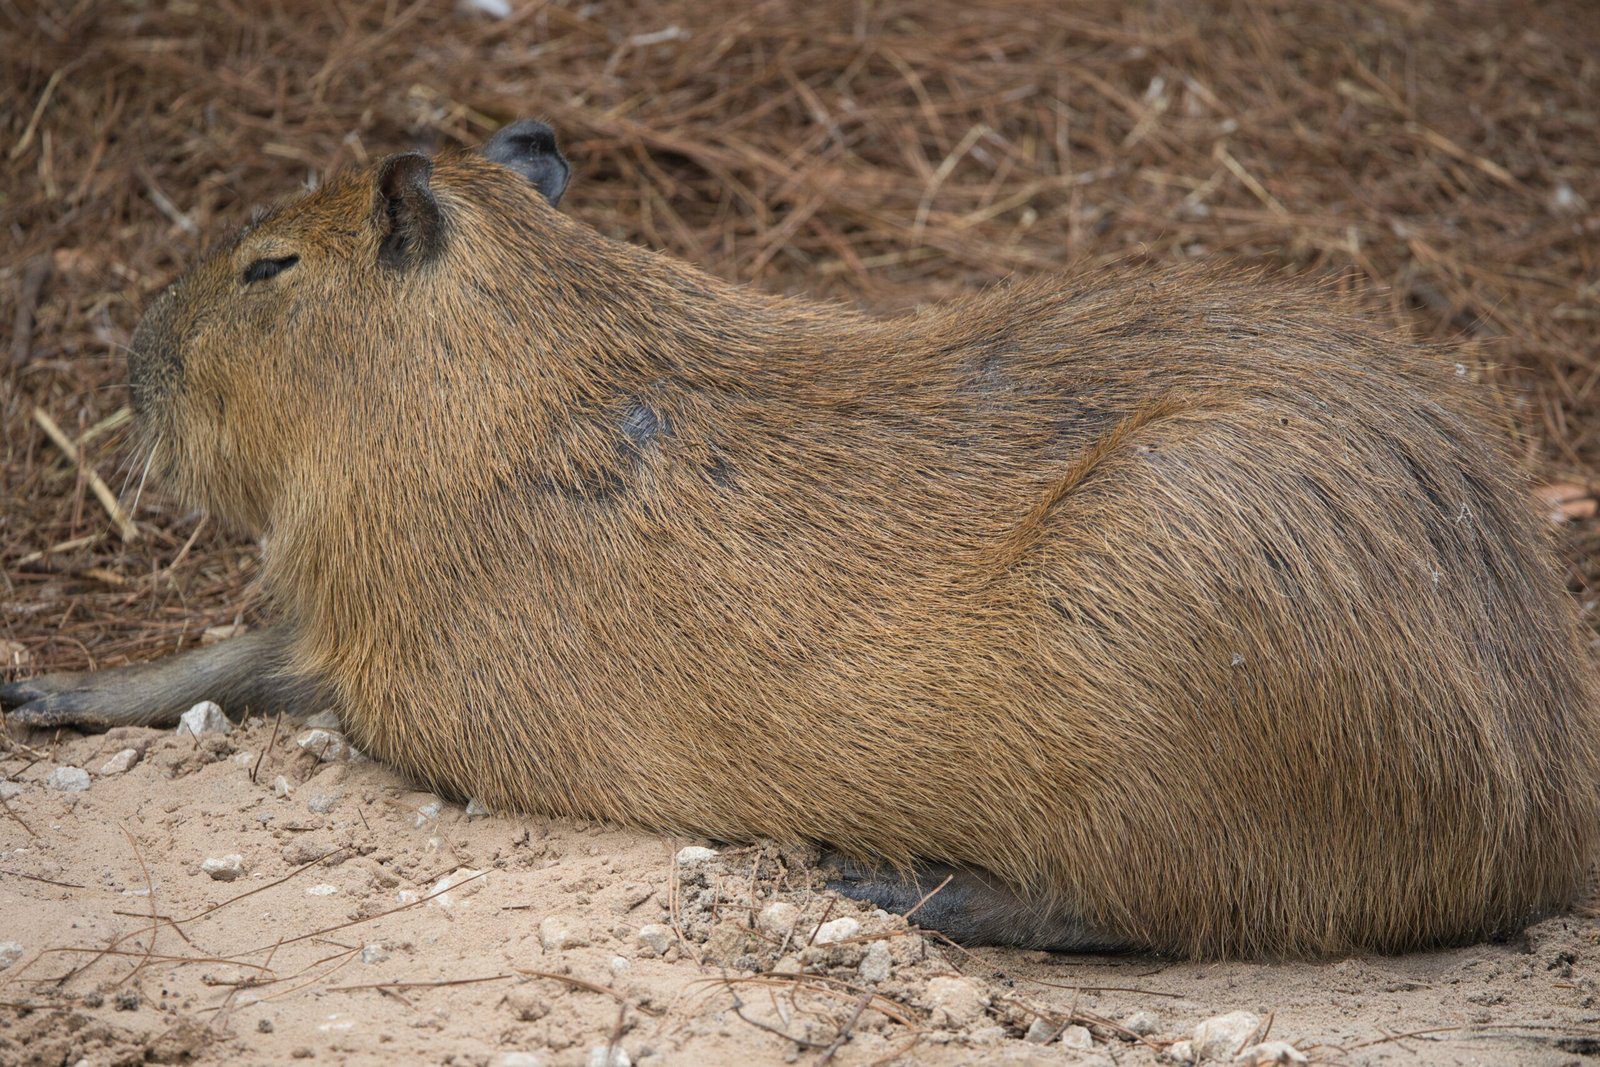 Visit the Capybara Petting Zoo in Newcastle